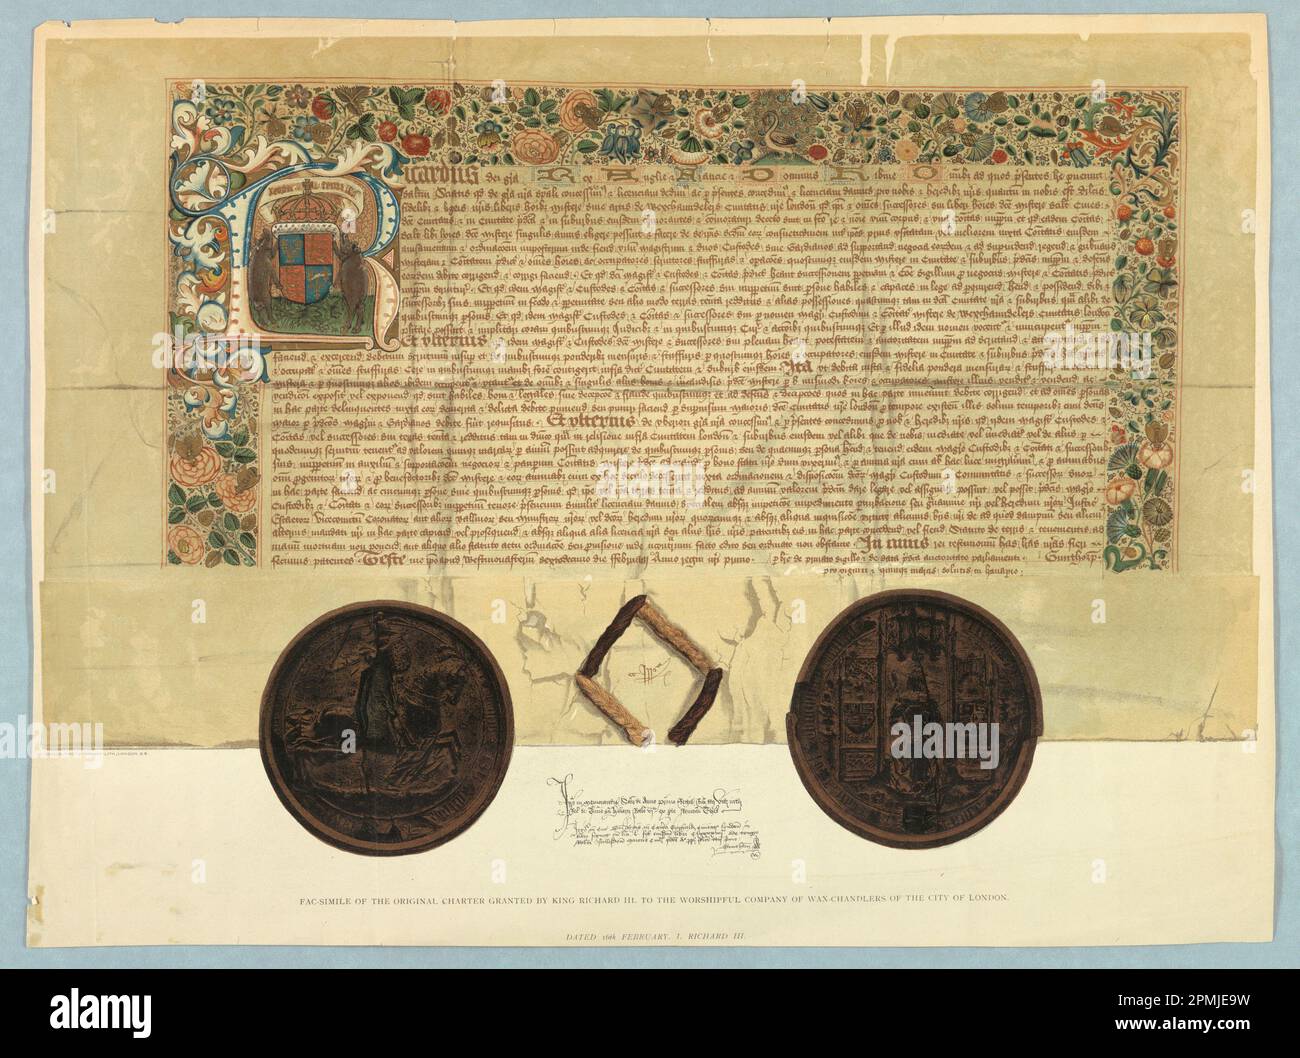 Print, Facsimile of the Original Charter Granted by King Richard III to the Worshipful Company of Wax-Chandlers of the City of London ; photo-chromo-lith Stock Photo